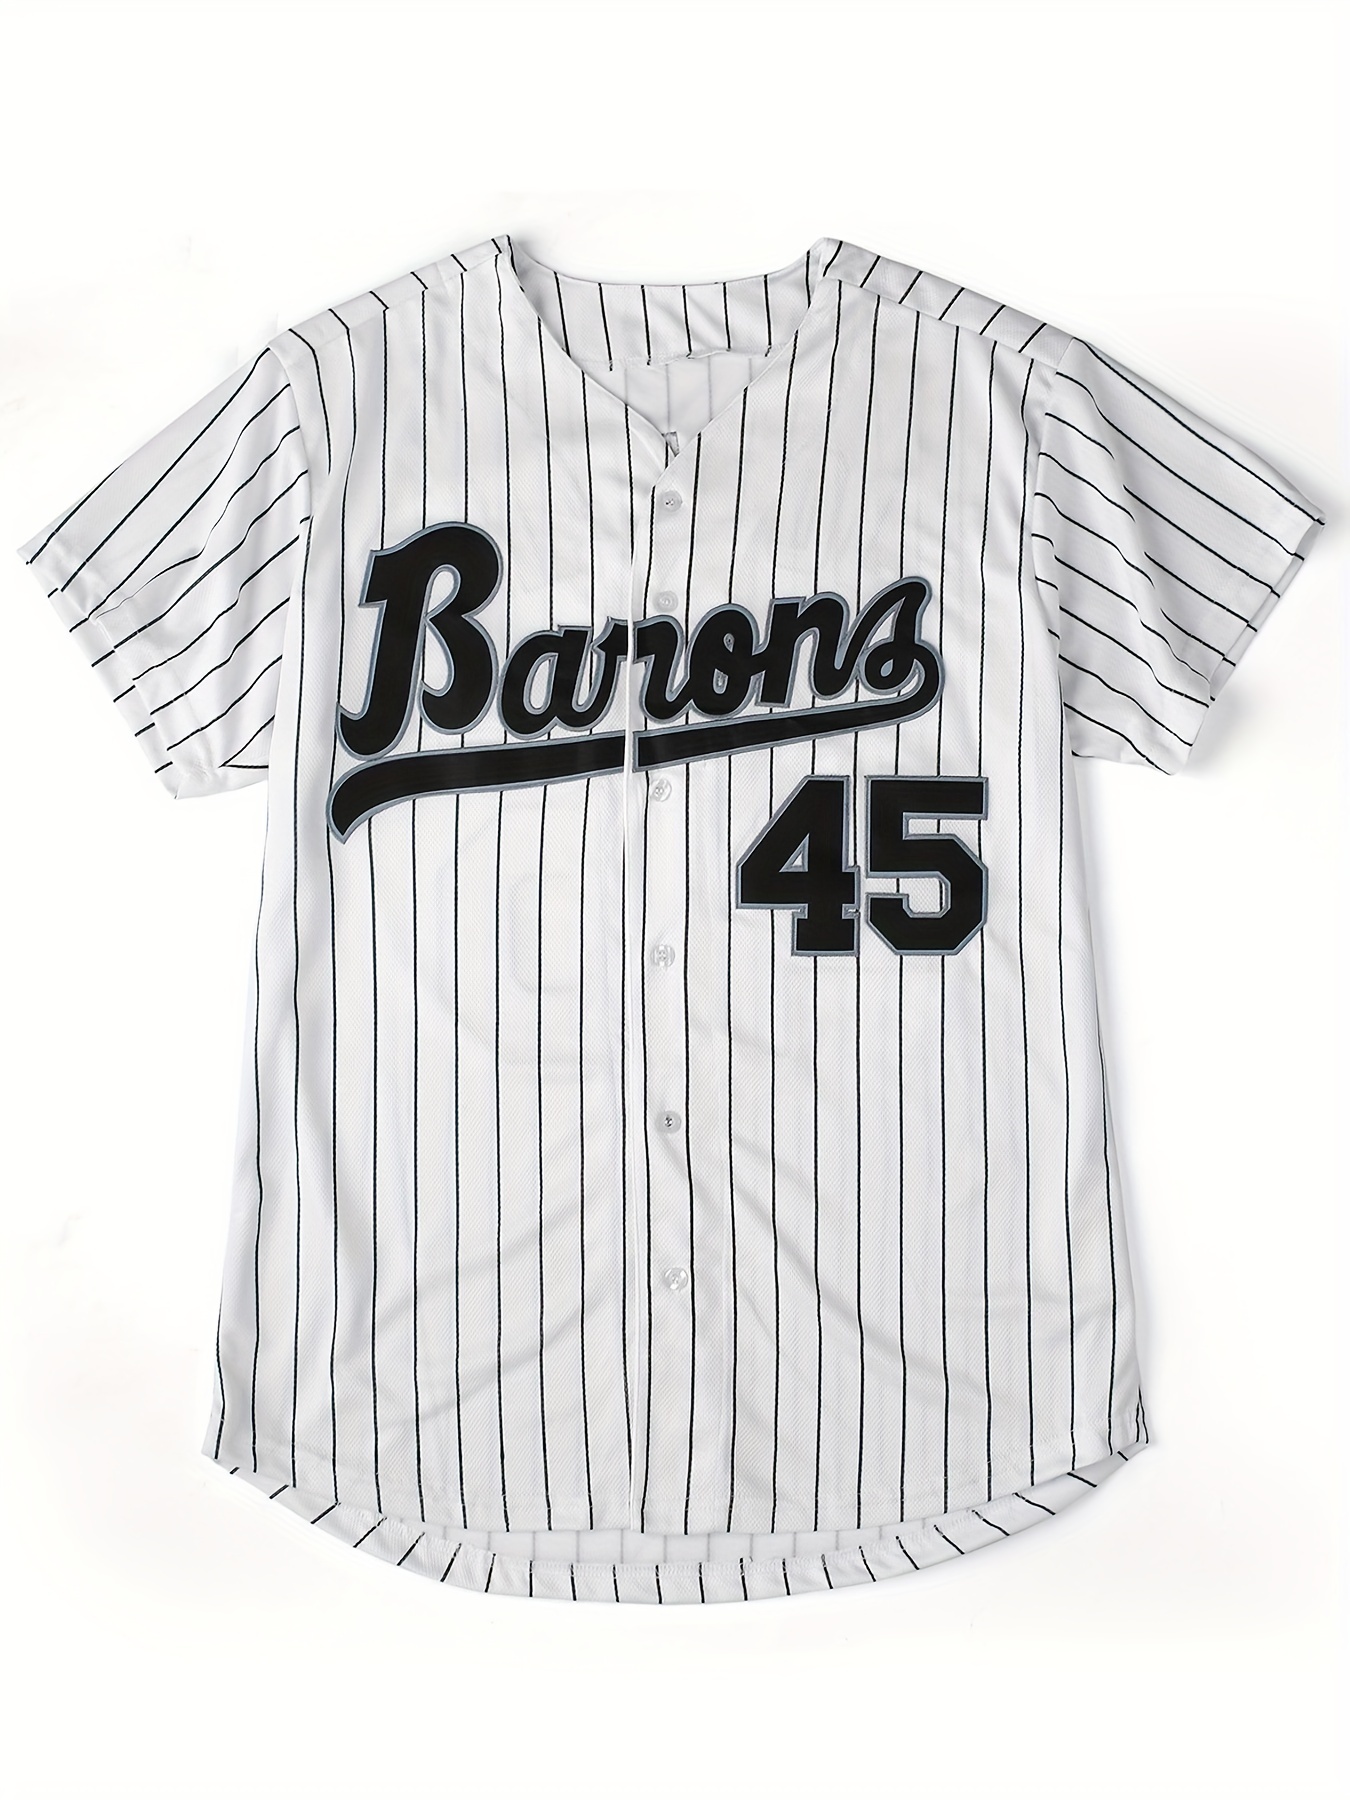 Men's Classic Design # 45 Baseball Jersey, Athletic Striped Button Up Short  Sleeve Baseball Shirt For Training Competition